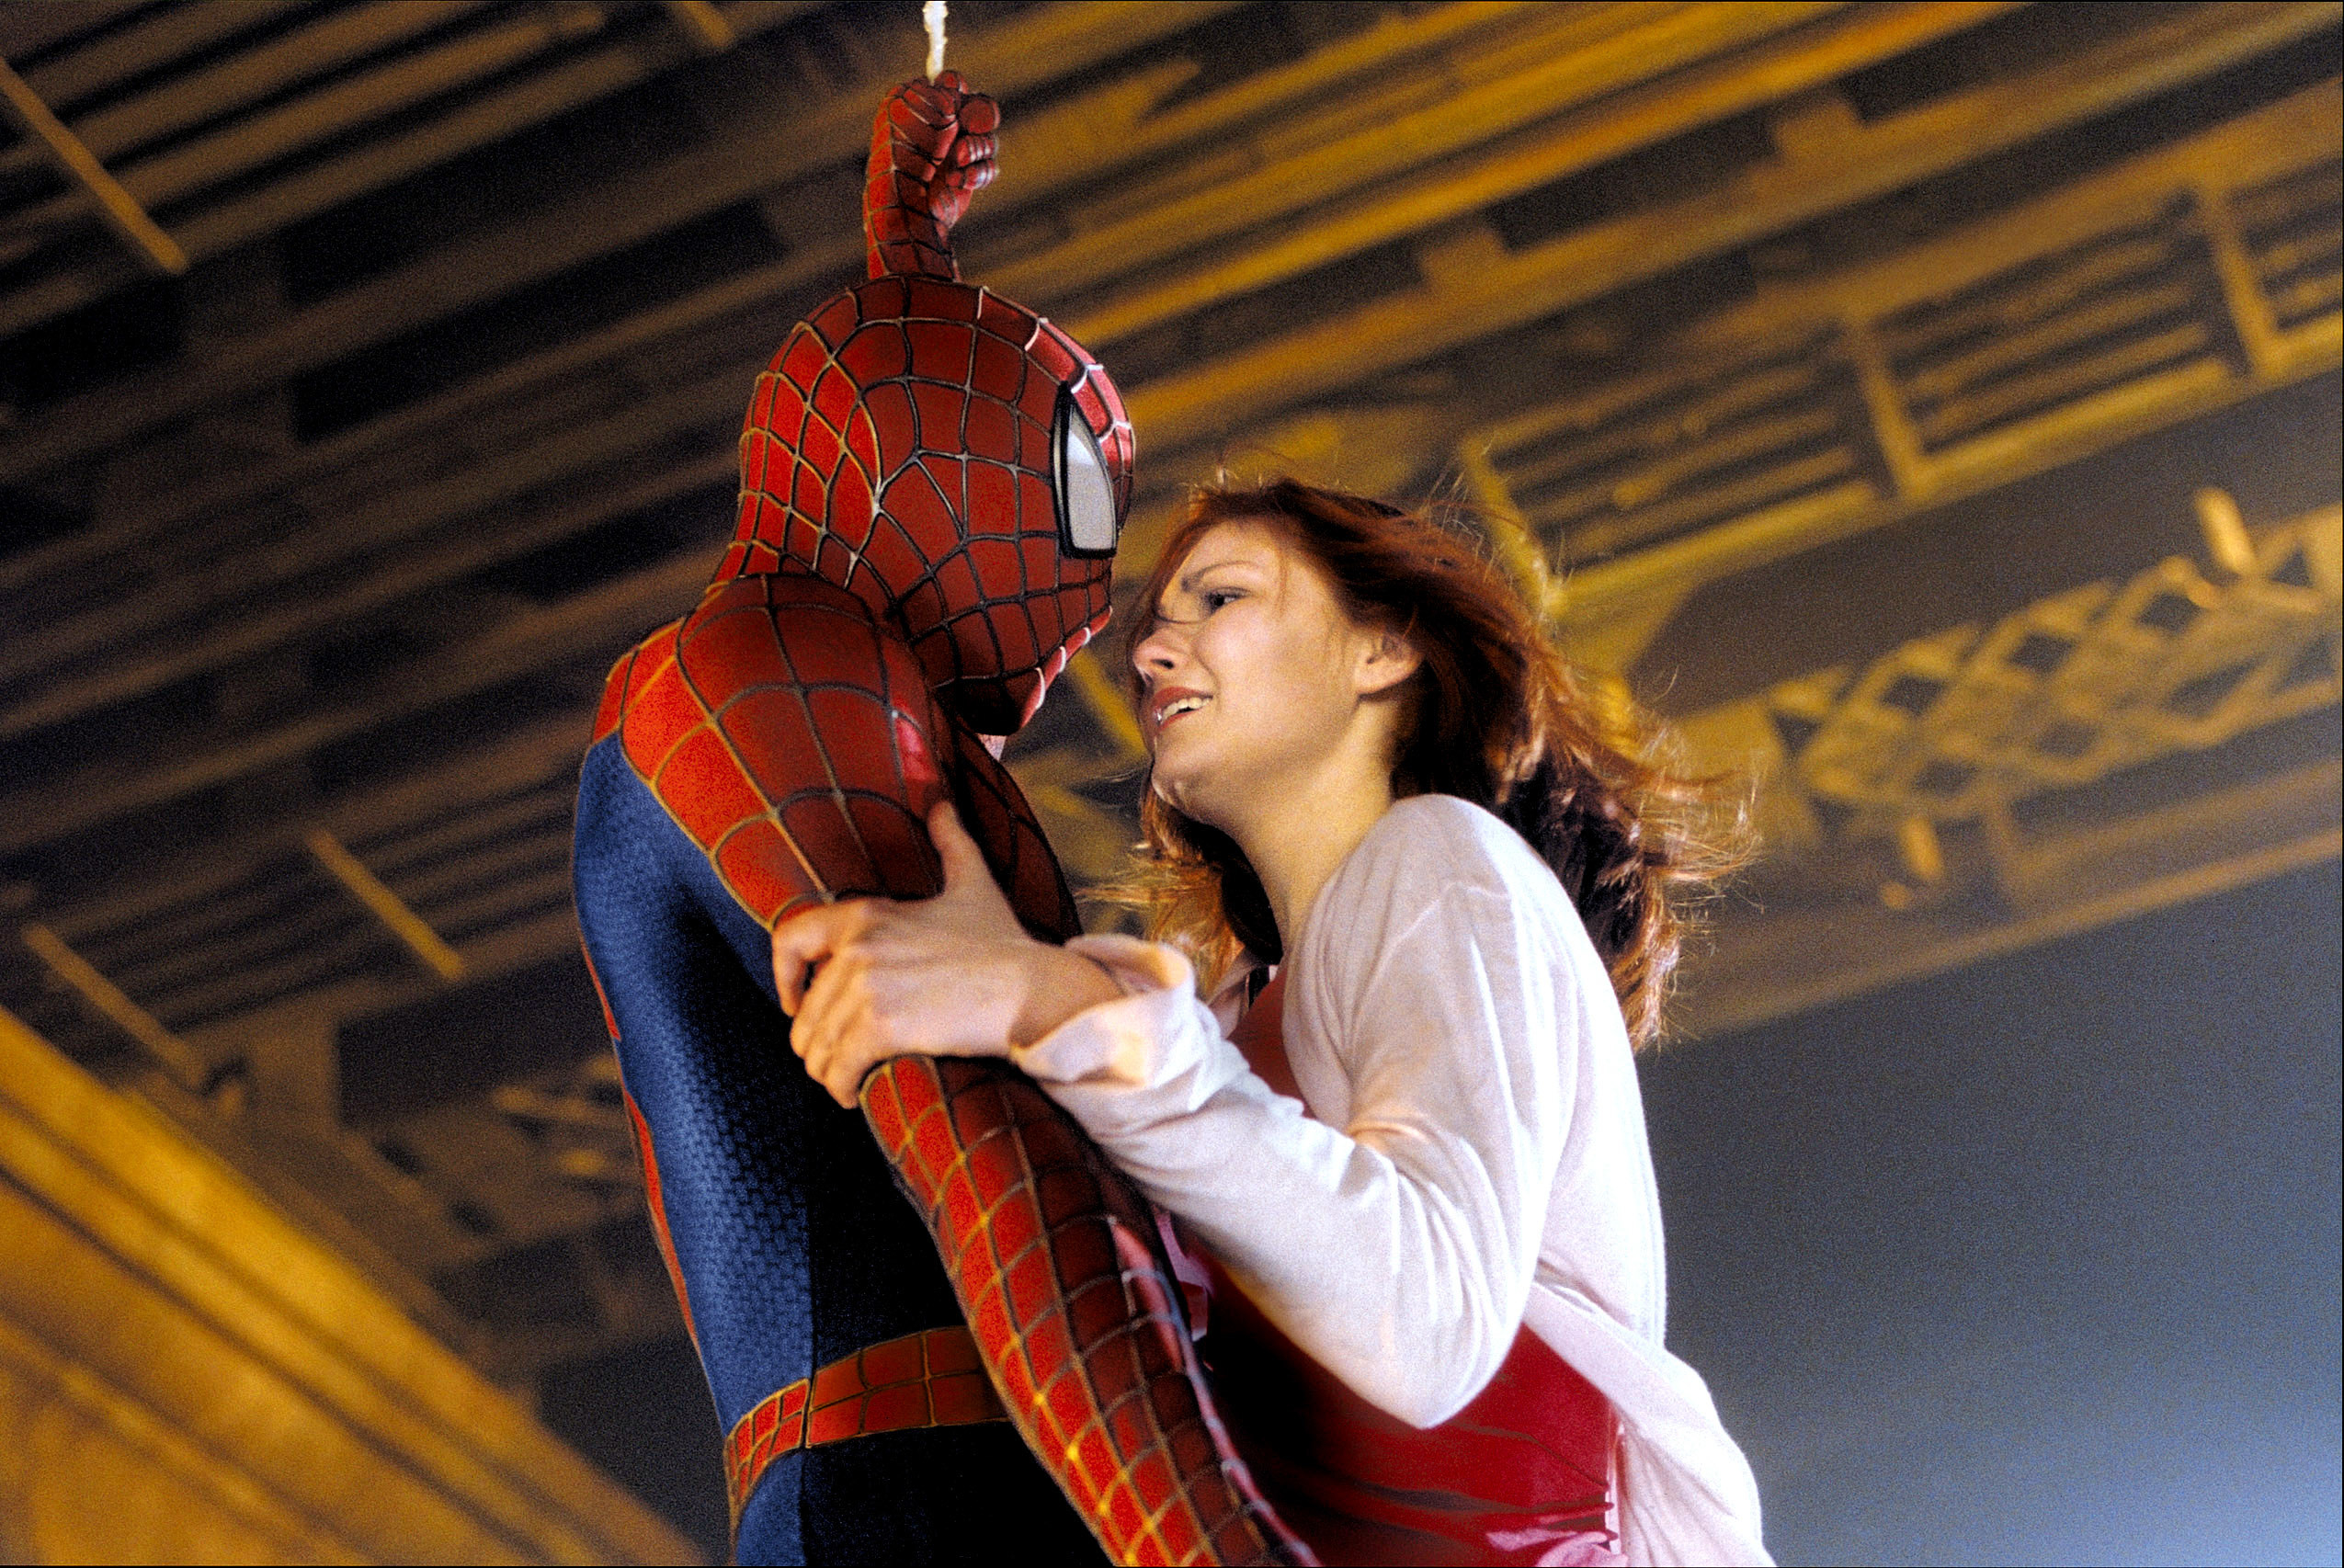 Kirsten as MJ with Tobey as Spider-Man